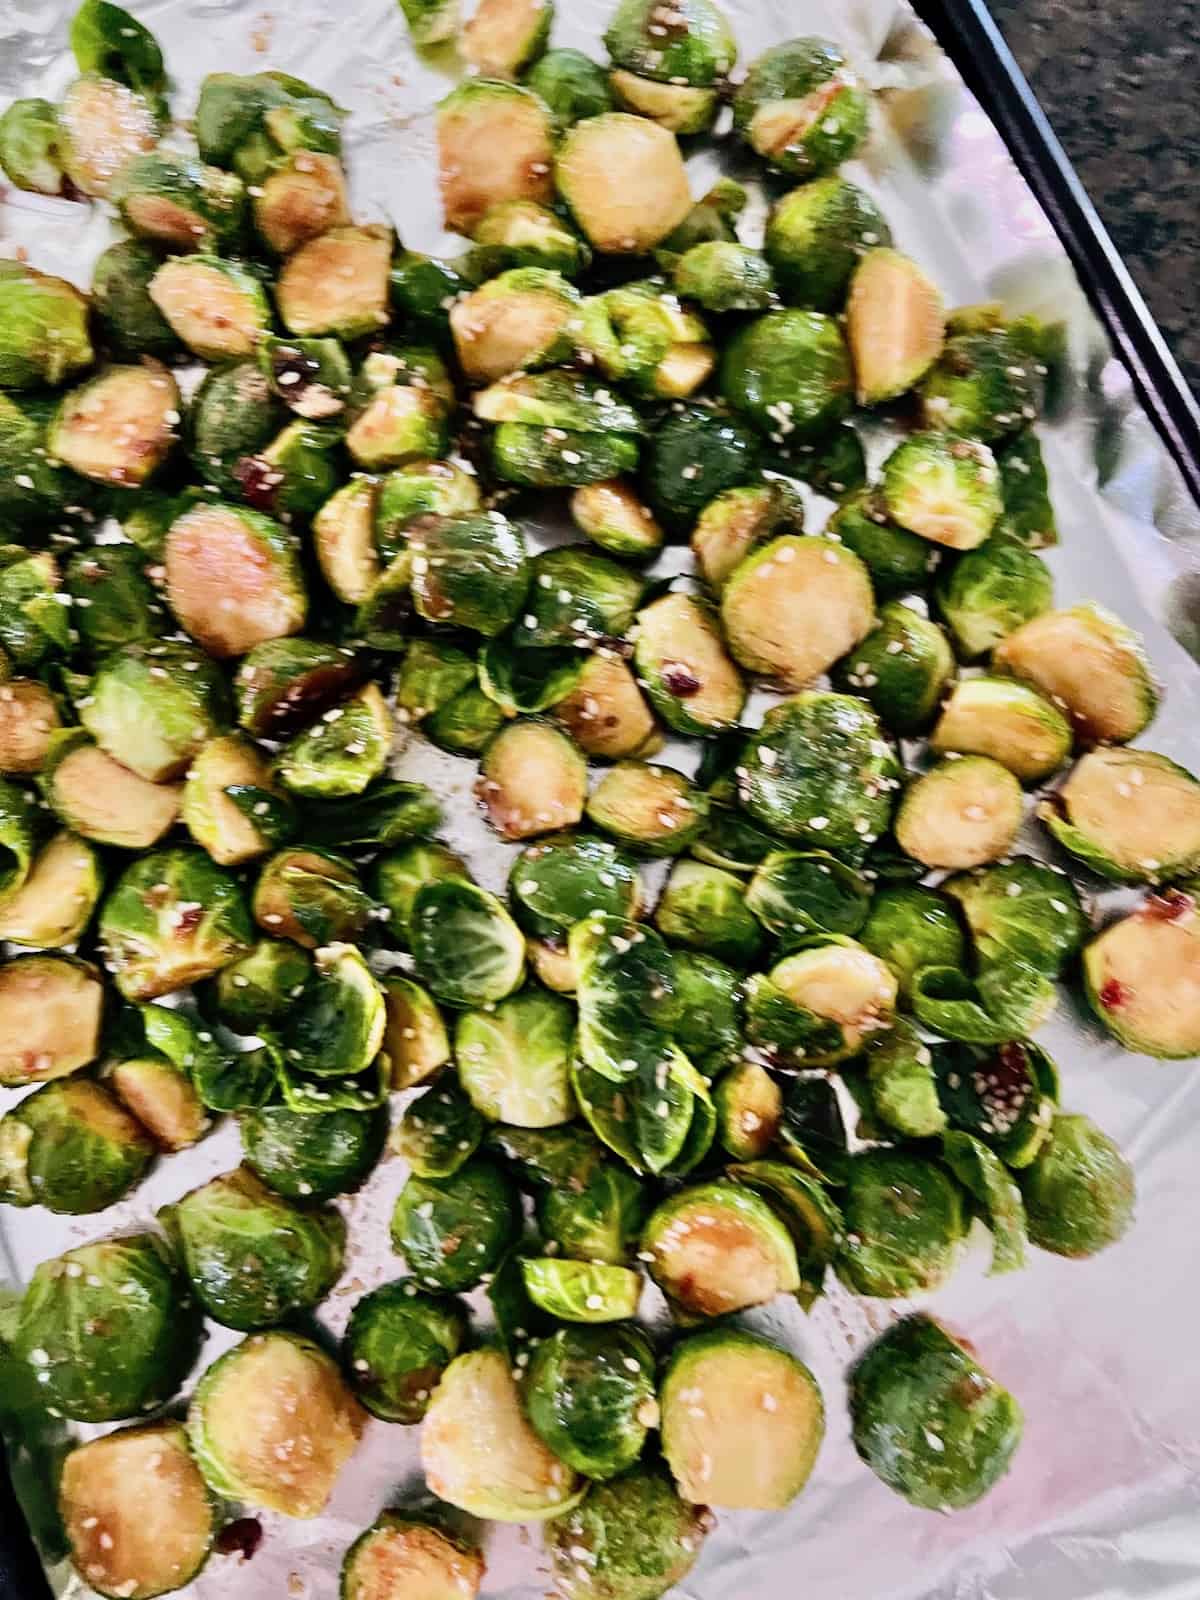 Asian-Inspired Teriyaki Brussels Sprouts On a sheet pan ready to go in the oven.